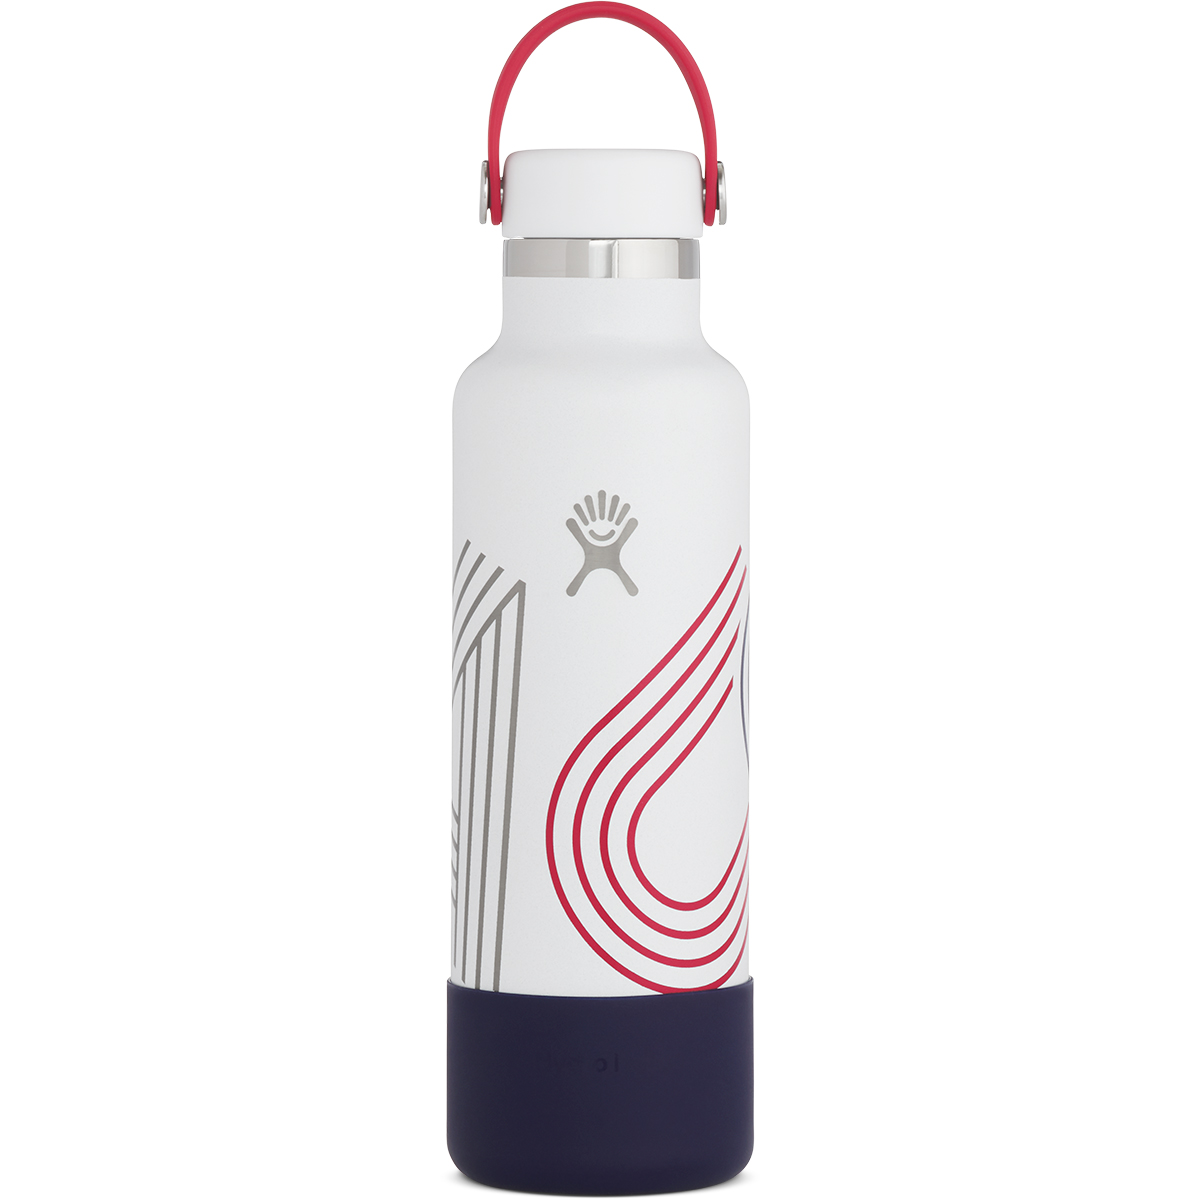 Hydro Flask Usa Limited Edition 21 Oz. Water Bottle